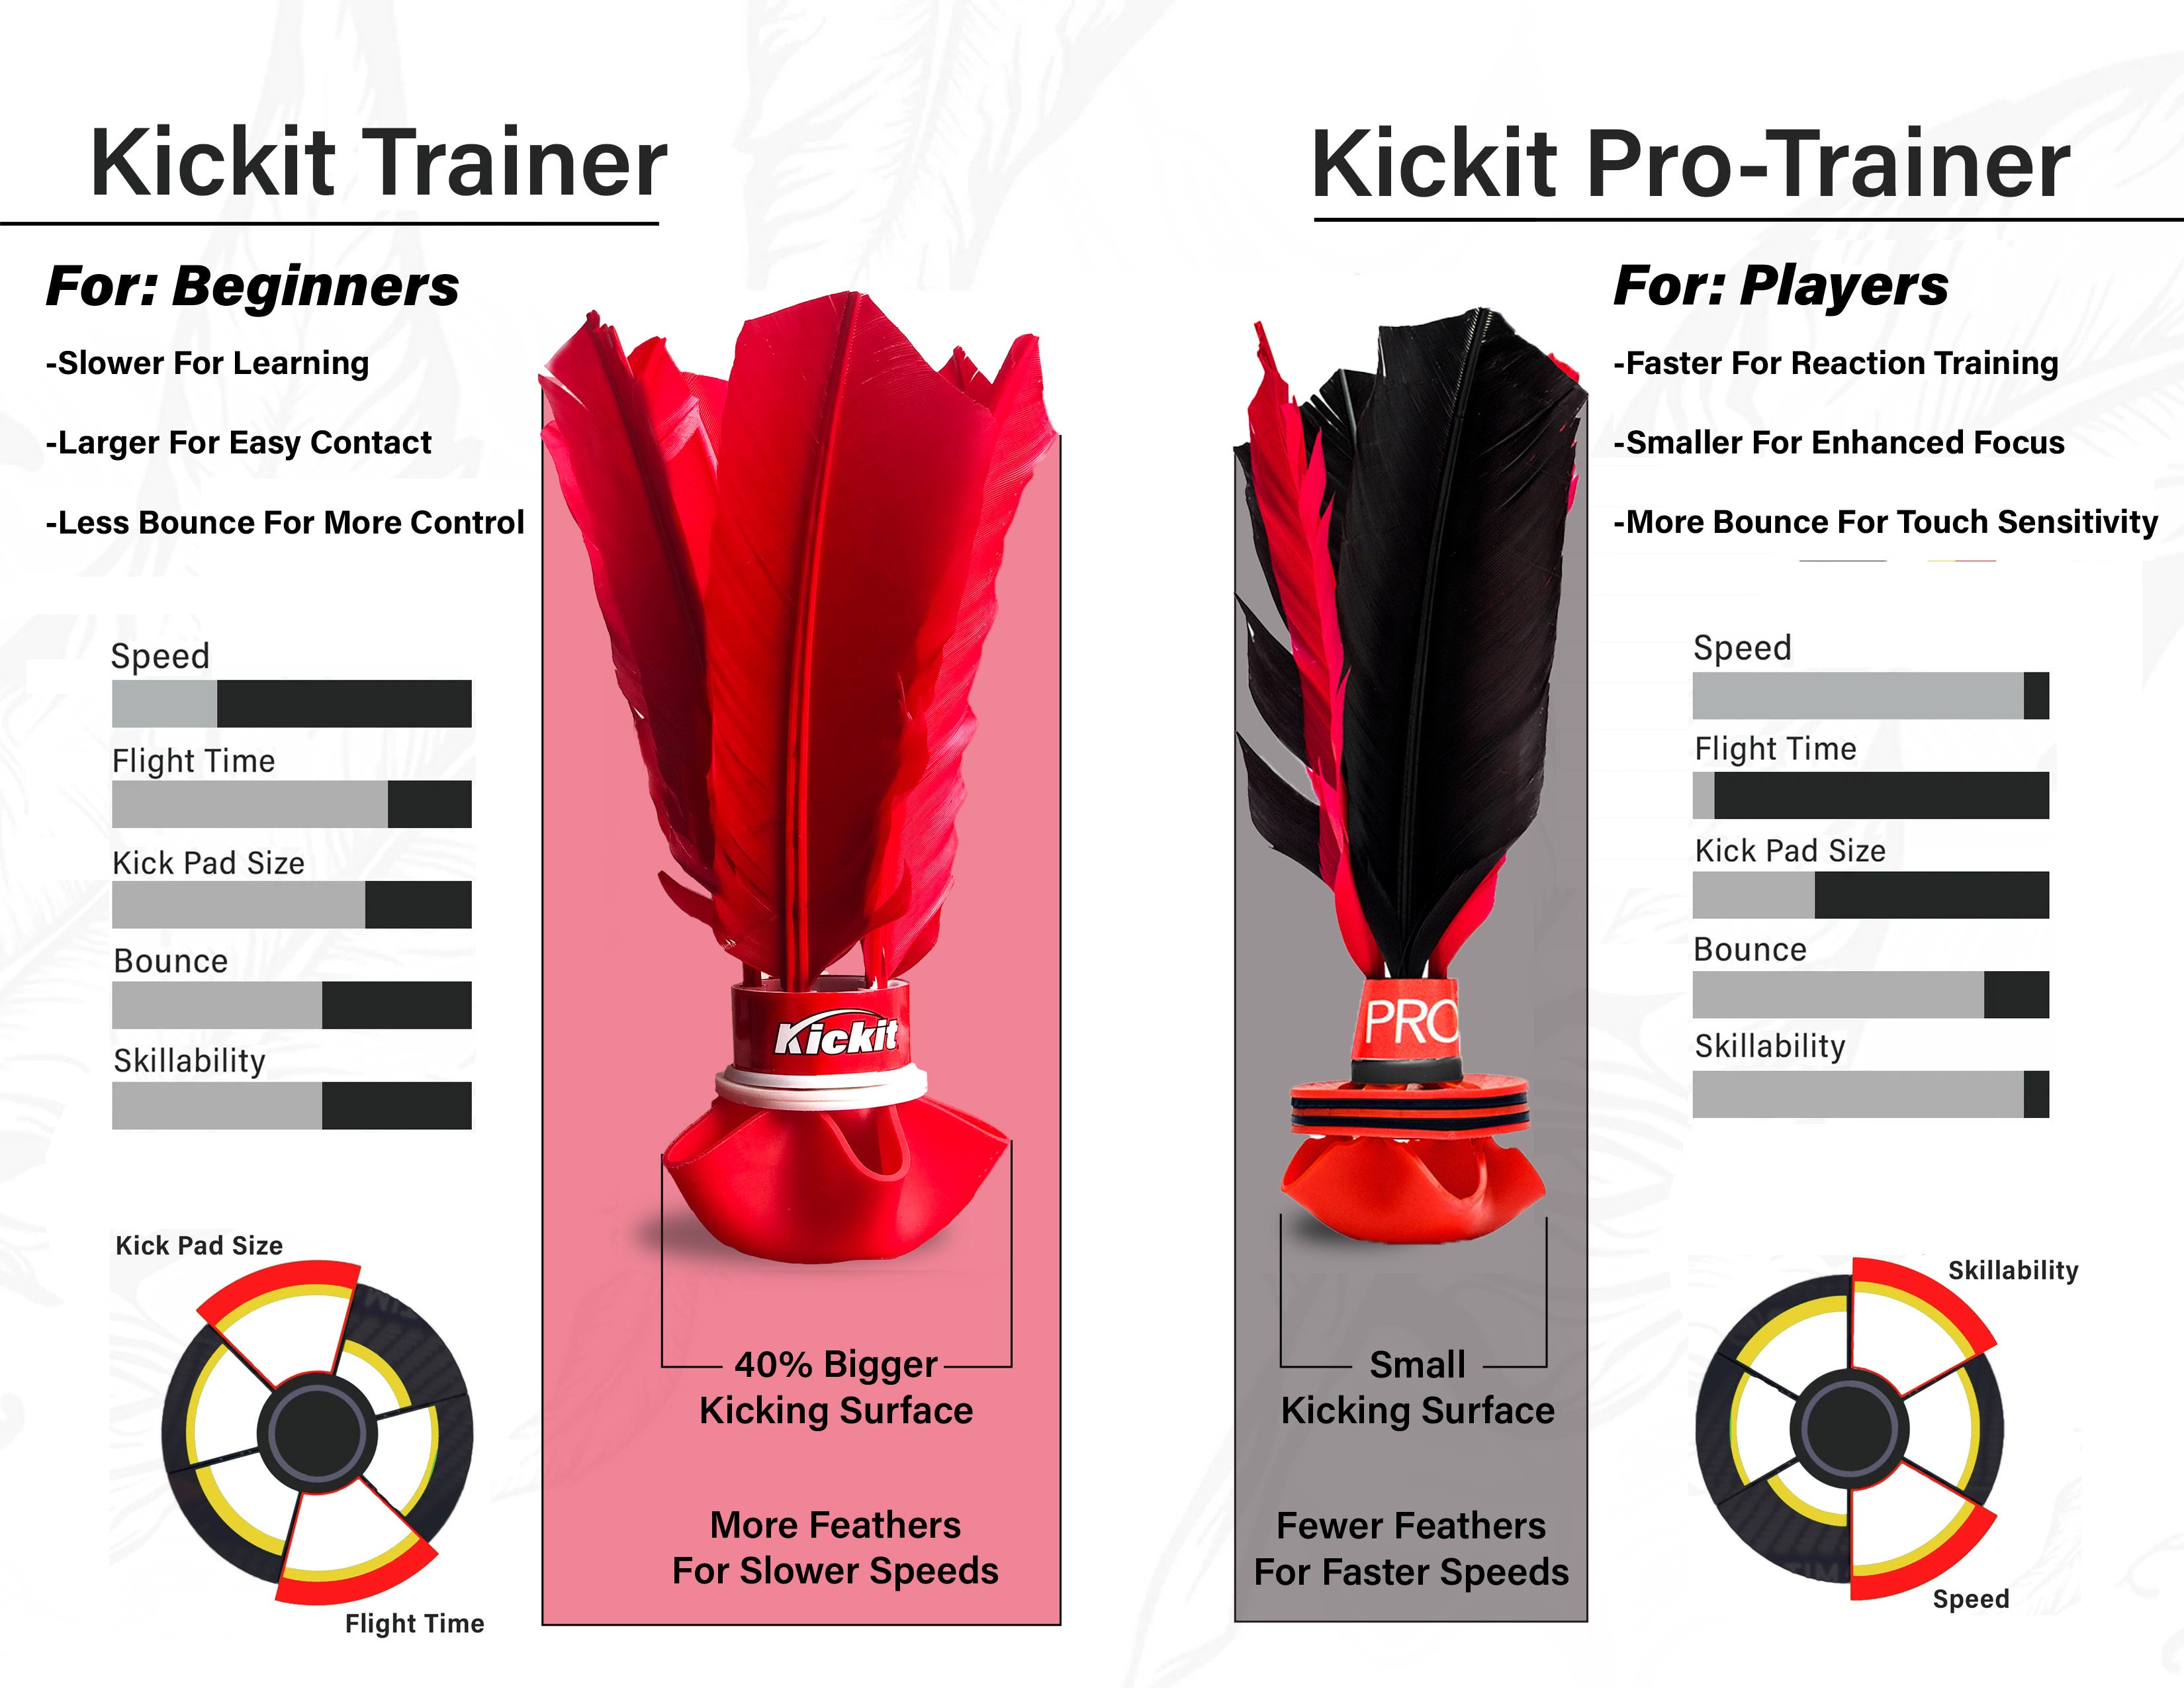 Difference between a Kickit and a Kickit Pro Trainer